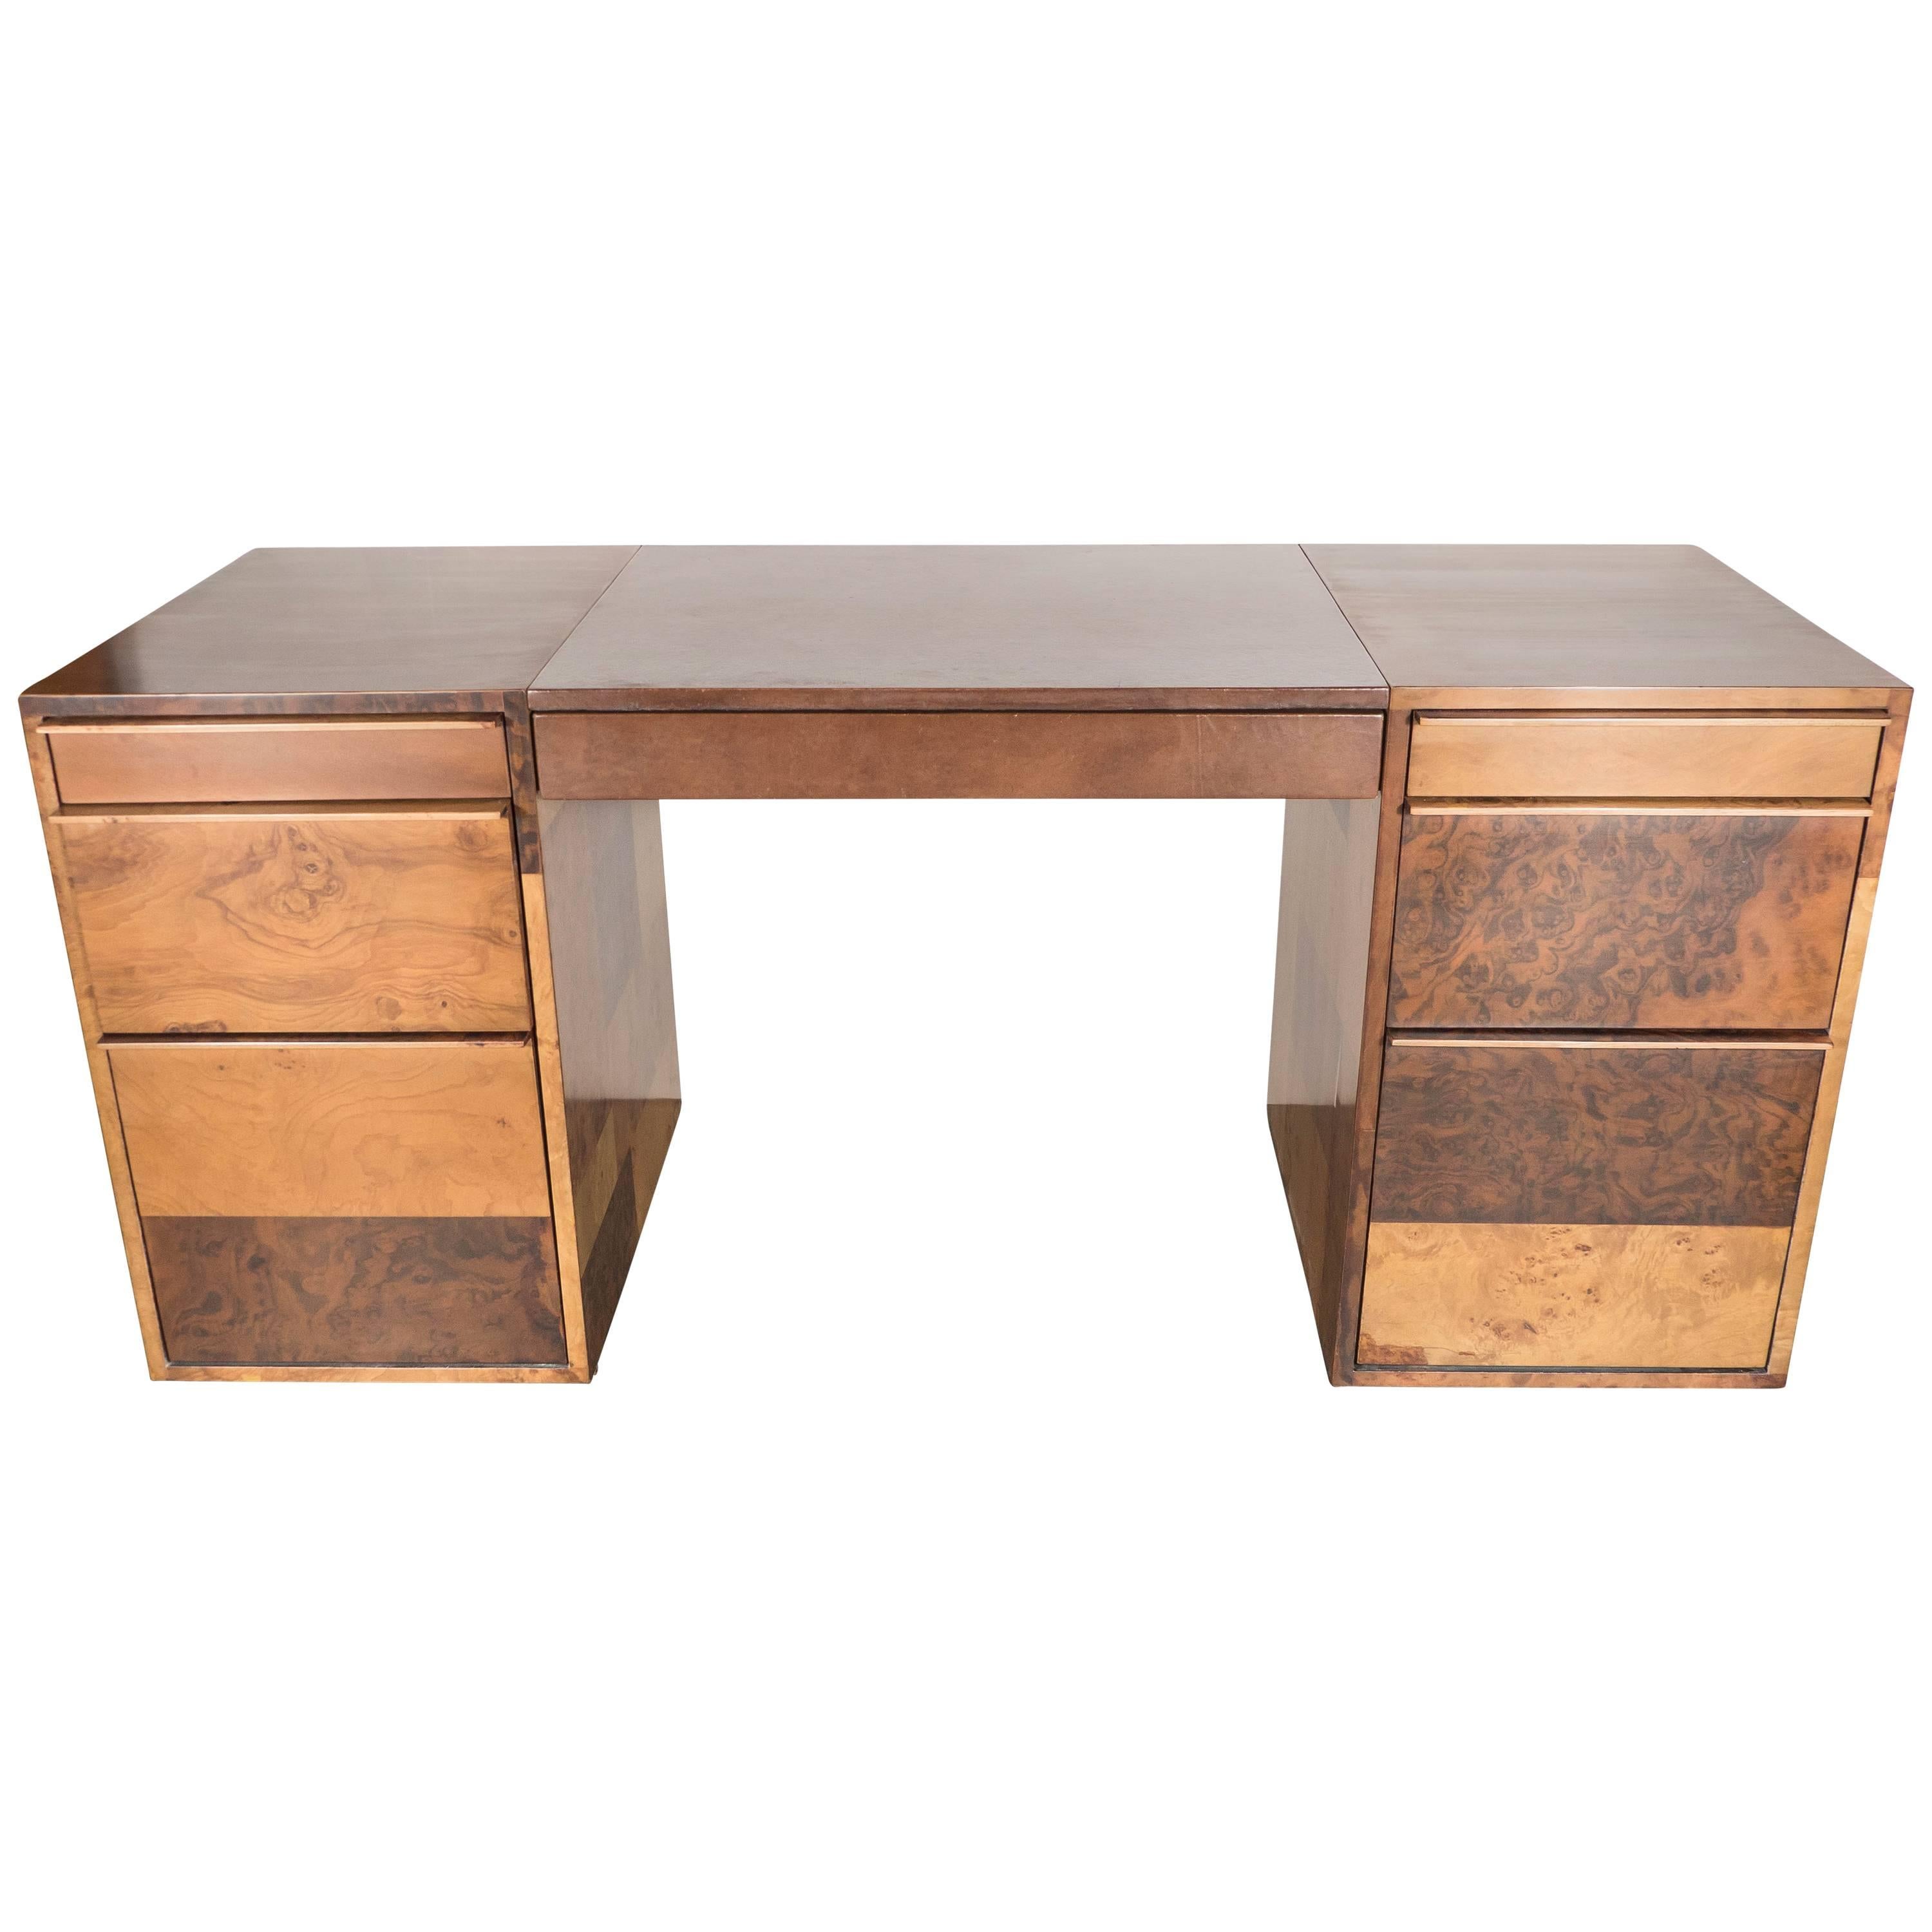 Mid-Century Modernist Executive Desk in Exotic Two-Toned Burl Wood